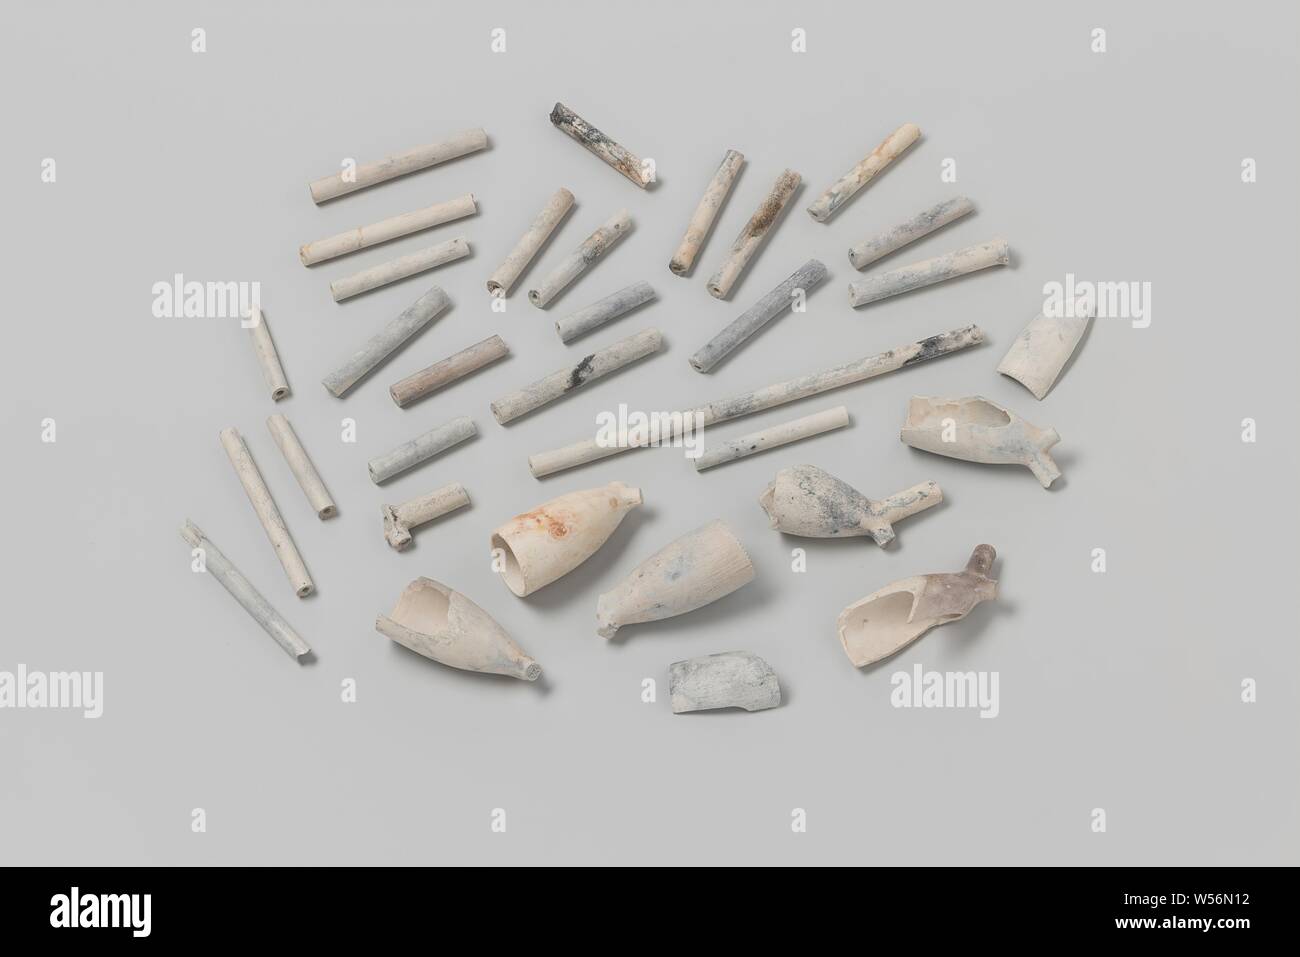 Fragments of pipe heads and pipe stalks from the wreck of the East Indies vessel 't Vliegend Hart, Six broken heads of earthen Gouda pipes, heel mark WS and one (without stem) with the heel mark of a five-leaf flower or sheet. Two shards of a head. Twenty-four pieces of steel, Dutch East India Company, 't Vliegend Hart (ship), WS, Gouda, 1700 - 2-Mar-1735, pipe clay, l 5.1 cm × w 2 cm × d 3 cm × l 2.8 cm × d 0.6 cm Stock Photo